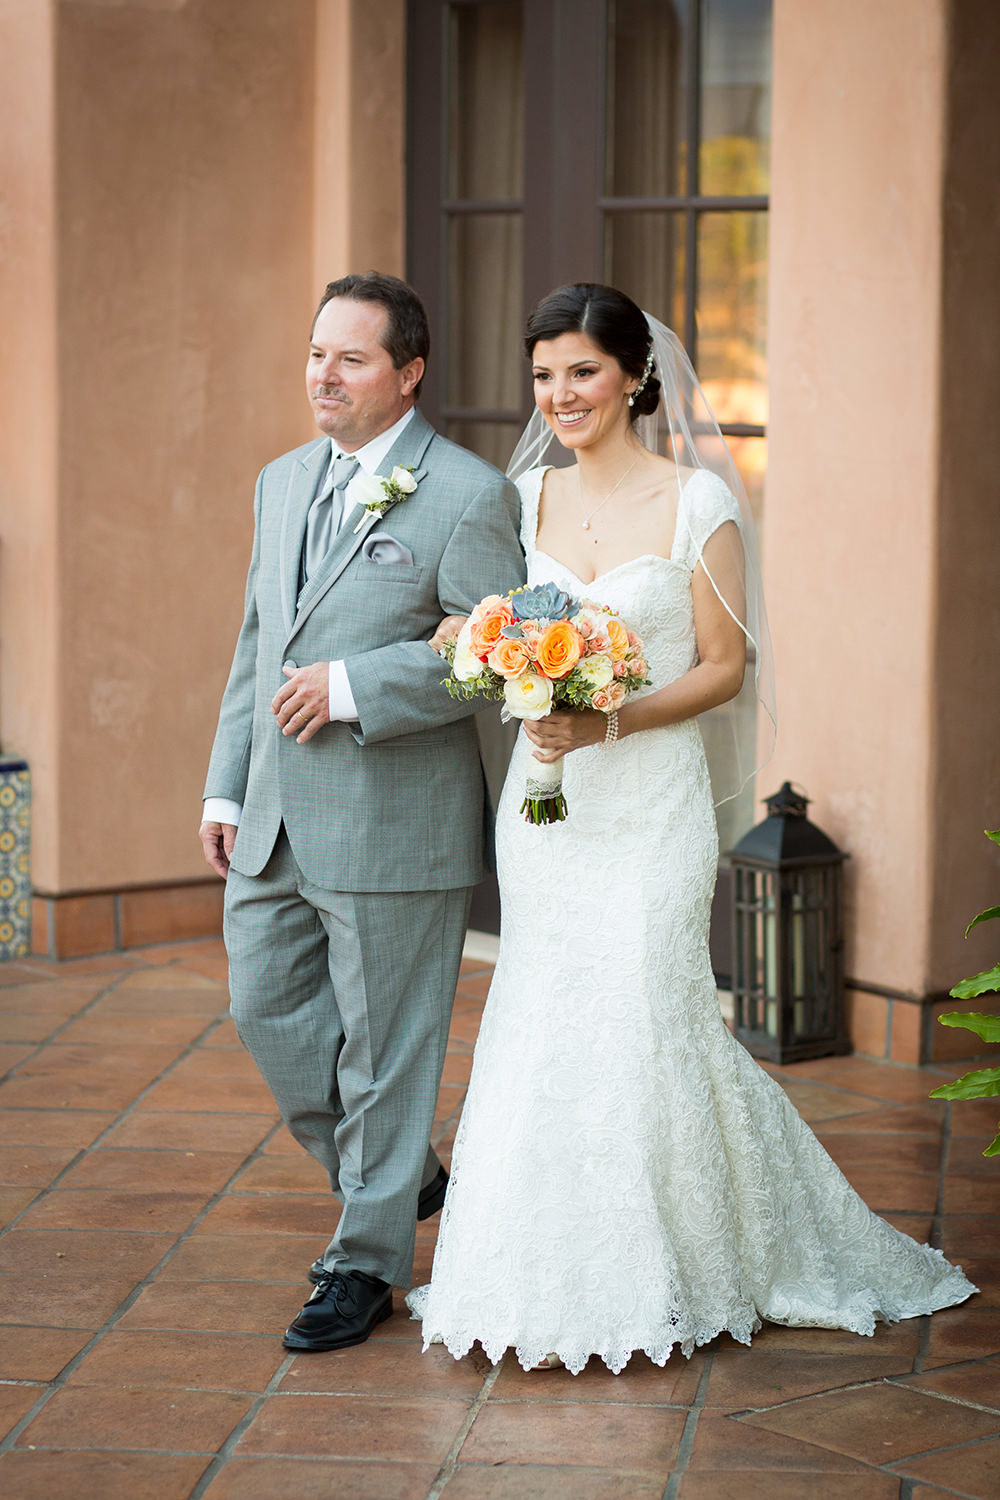 The beginning of a wedding ceremony at Rancho Valencia